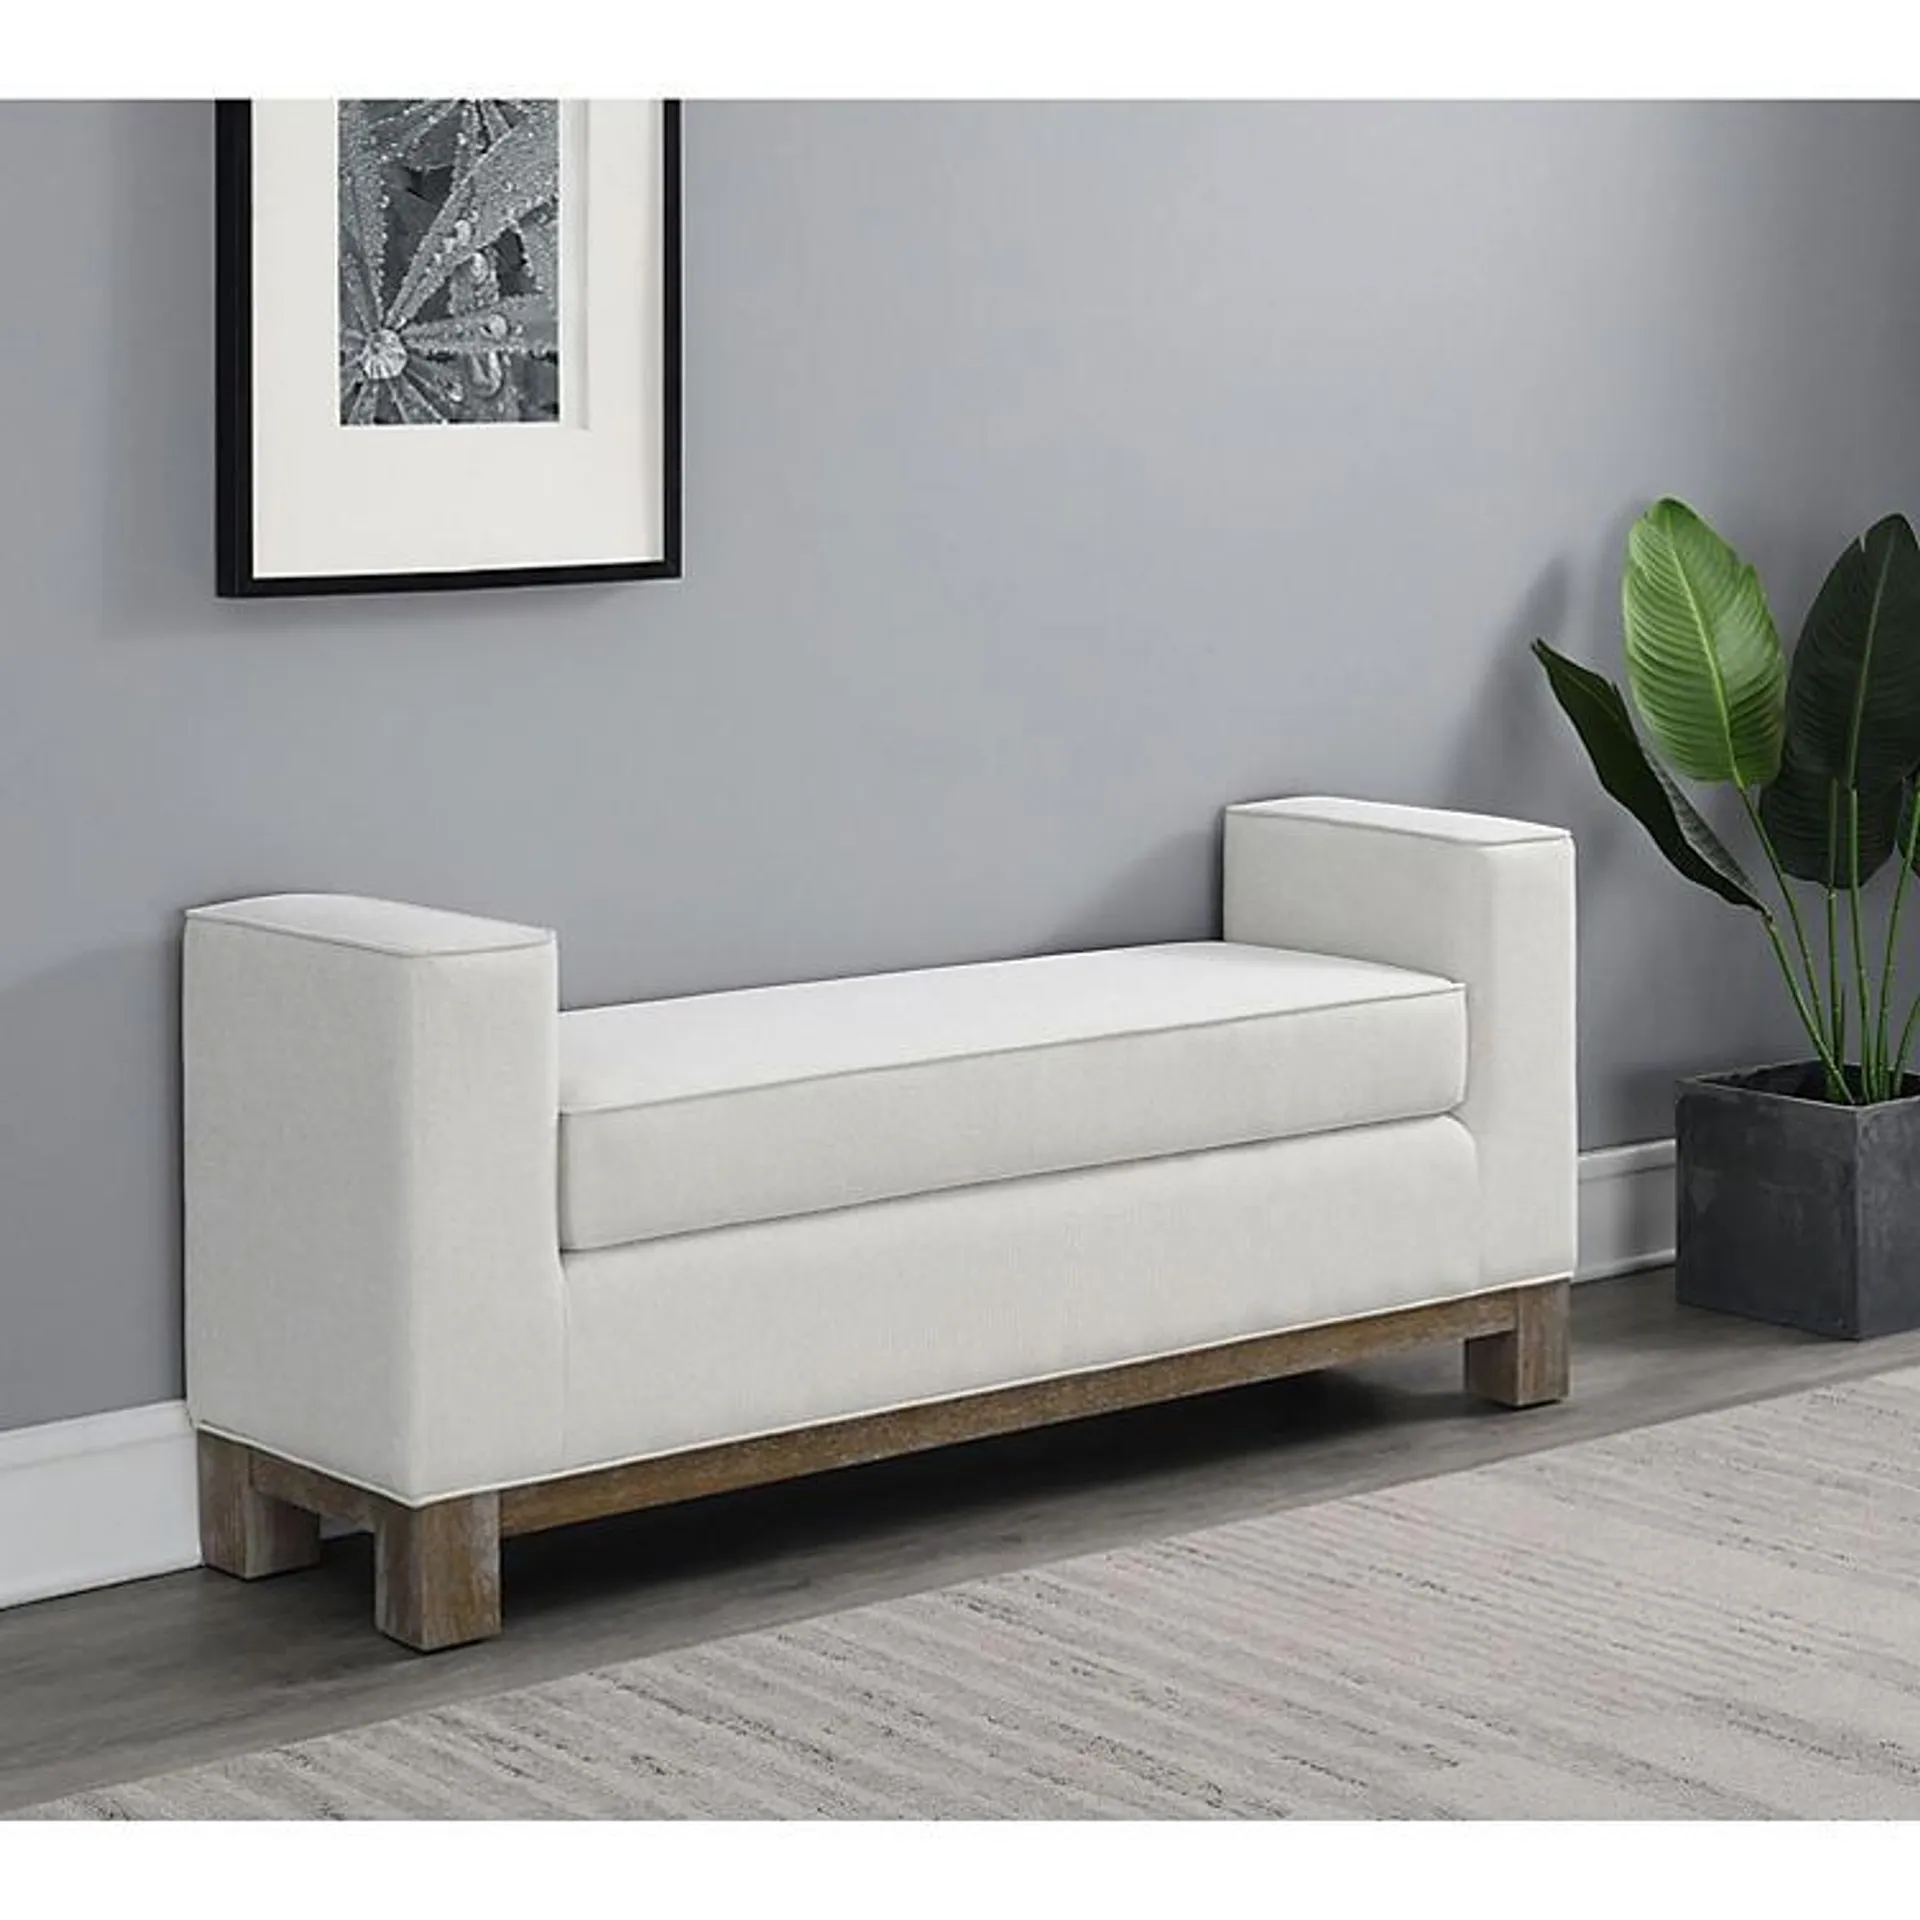 Cape Cod Upholstered Ottoman Bench, Assorted Sizes & Colors